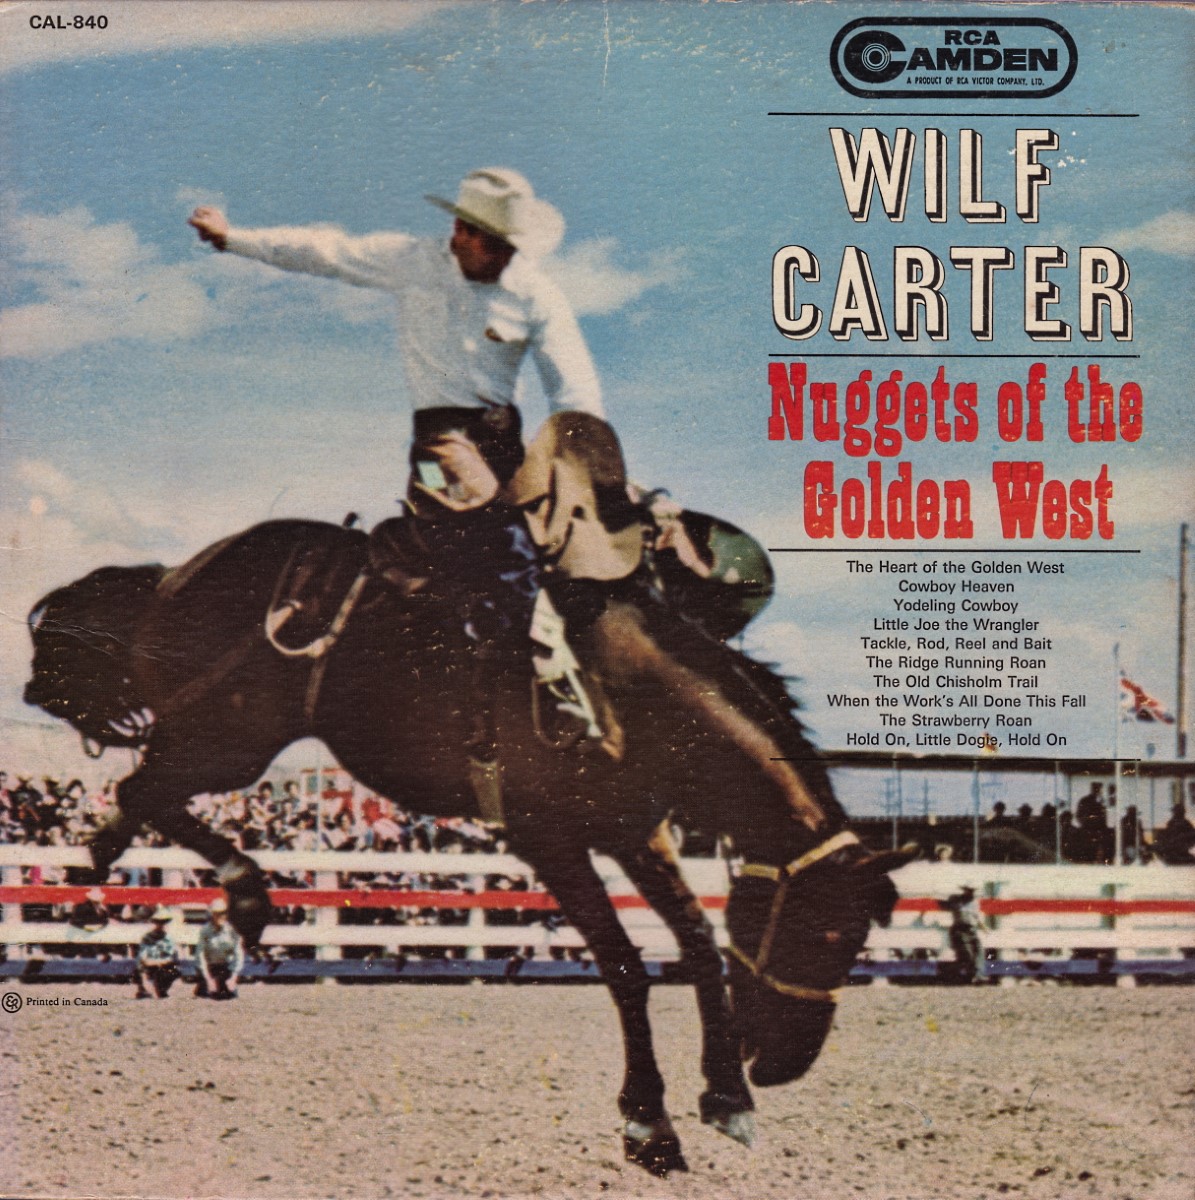 Wilf Carter - Nuggets Of The Golden West (1964)